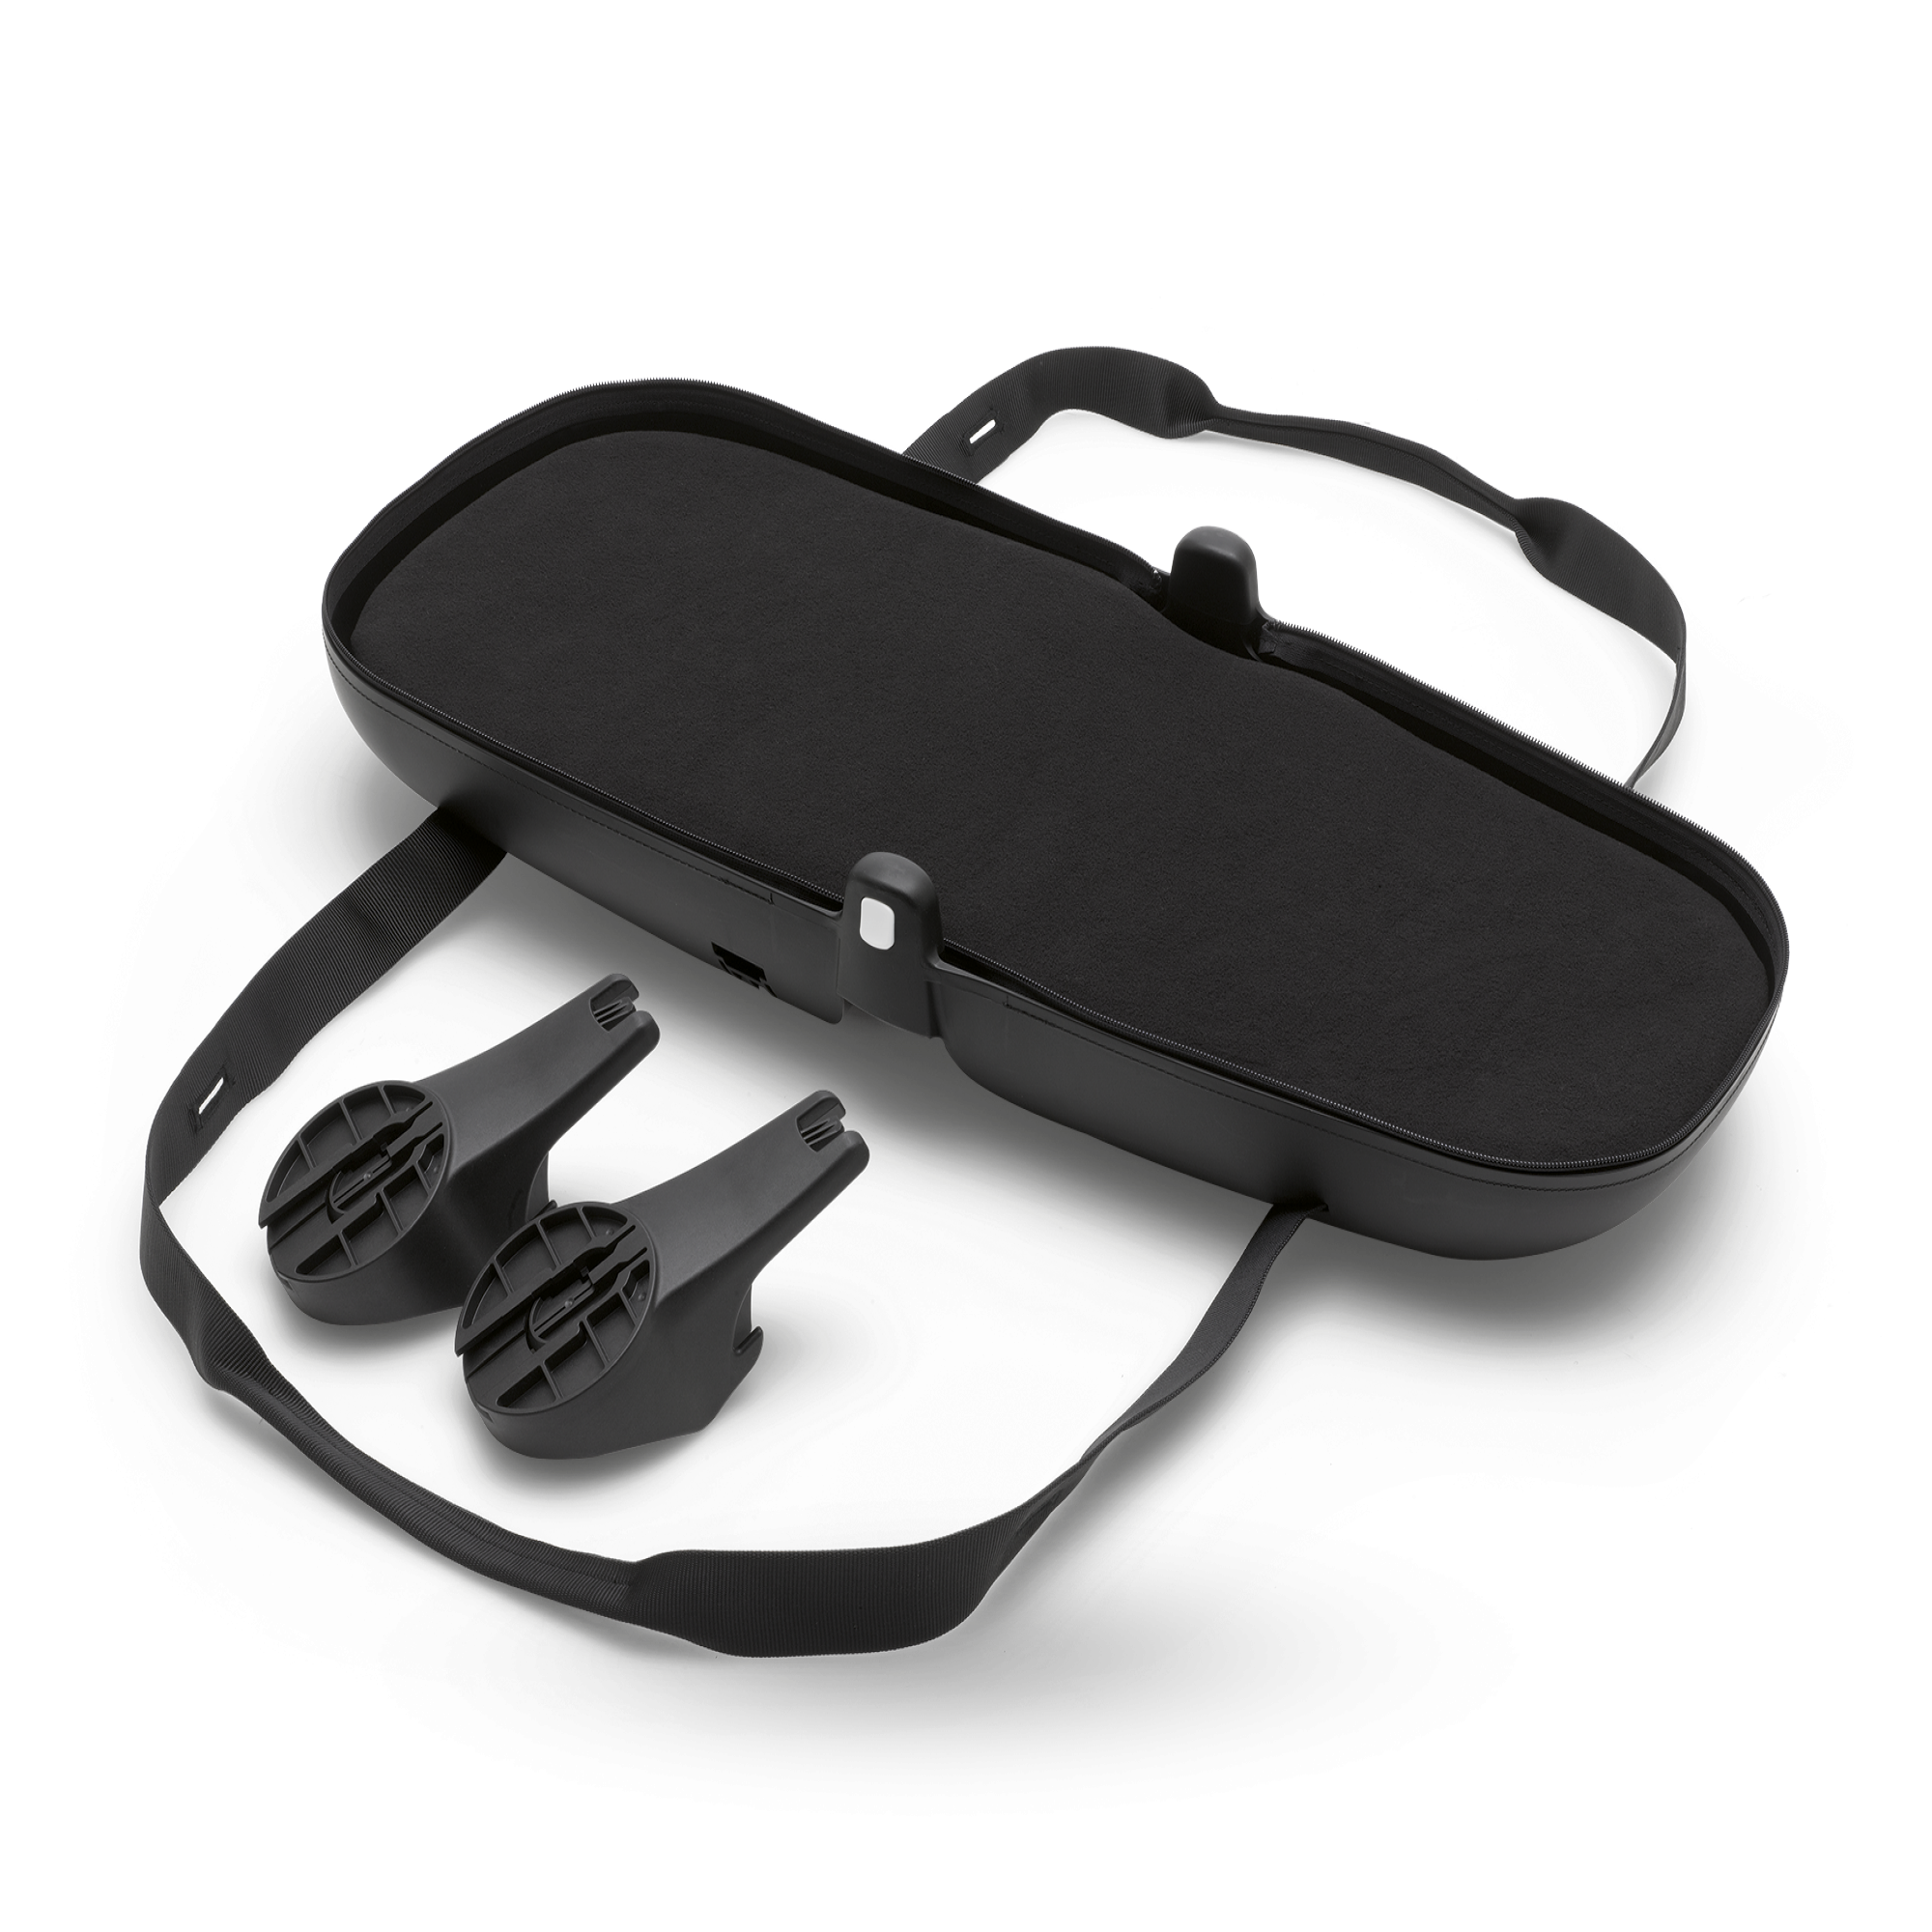 carrycot bugaboo